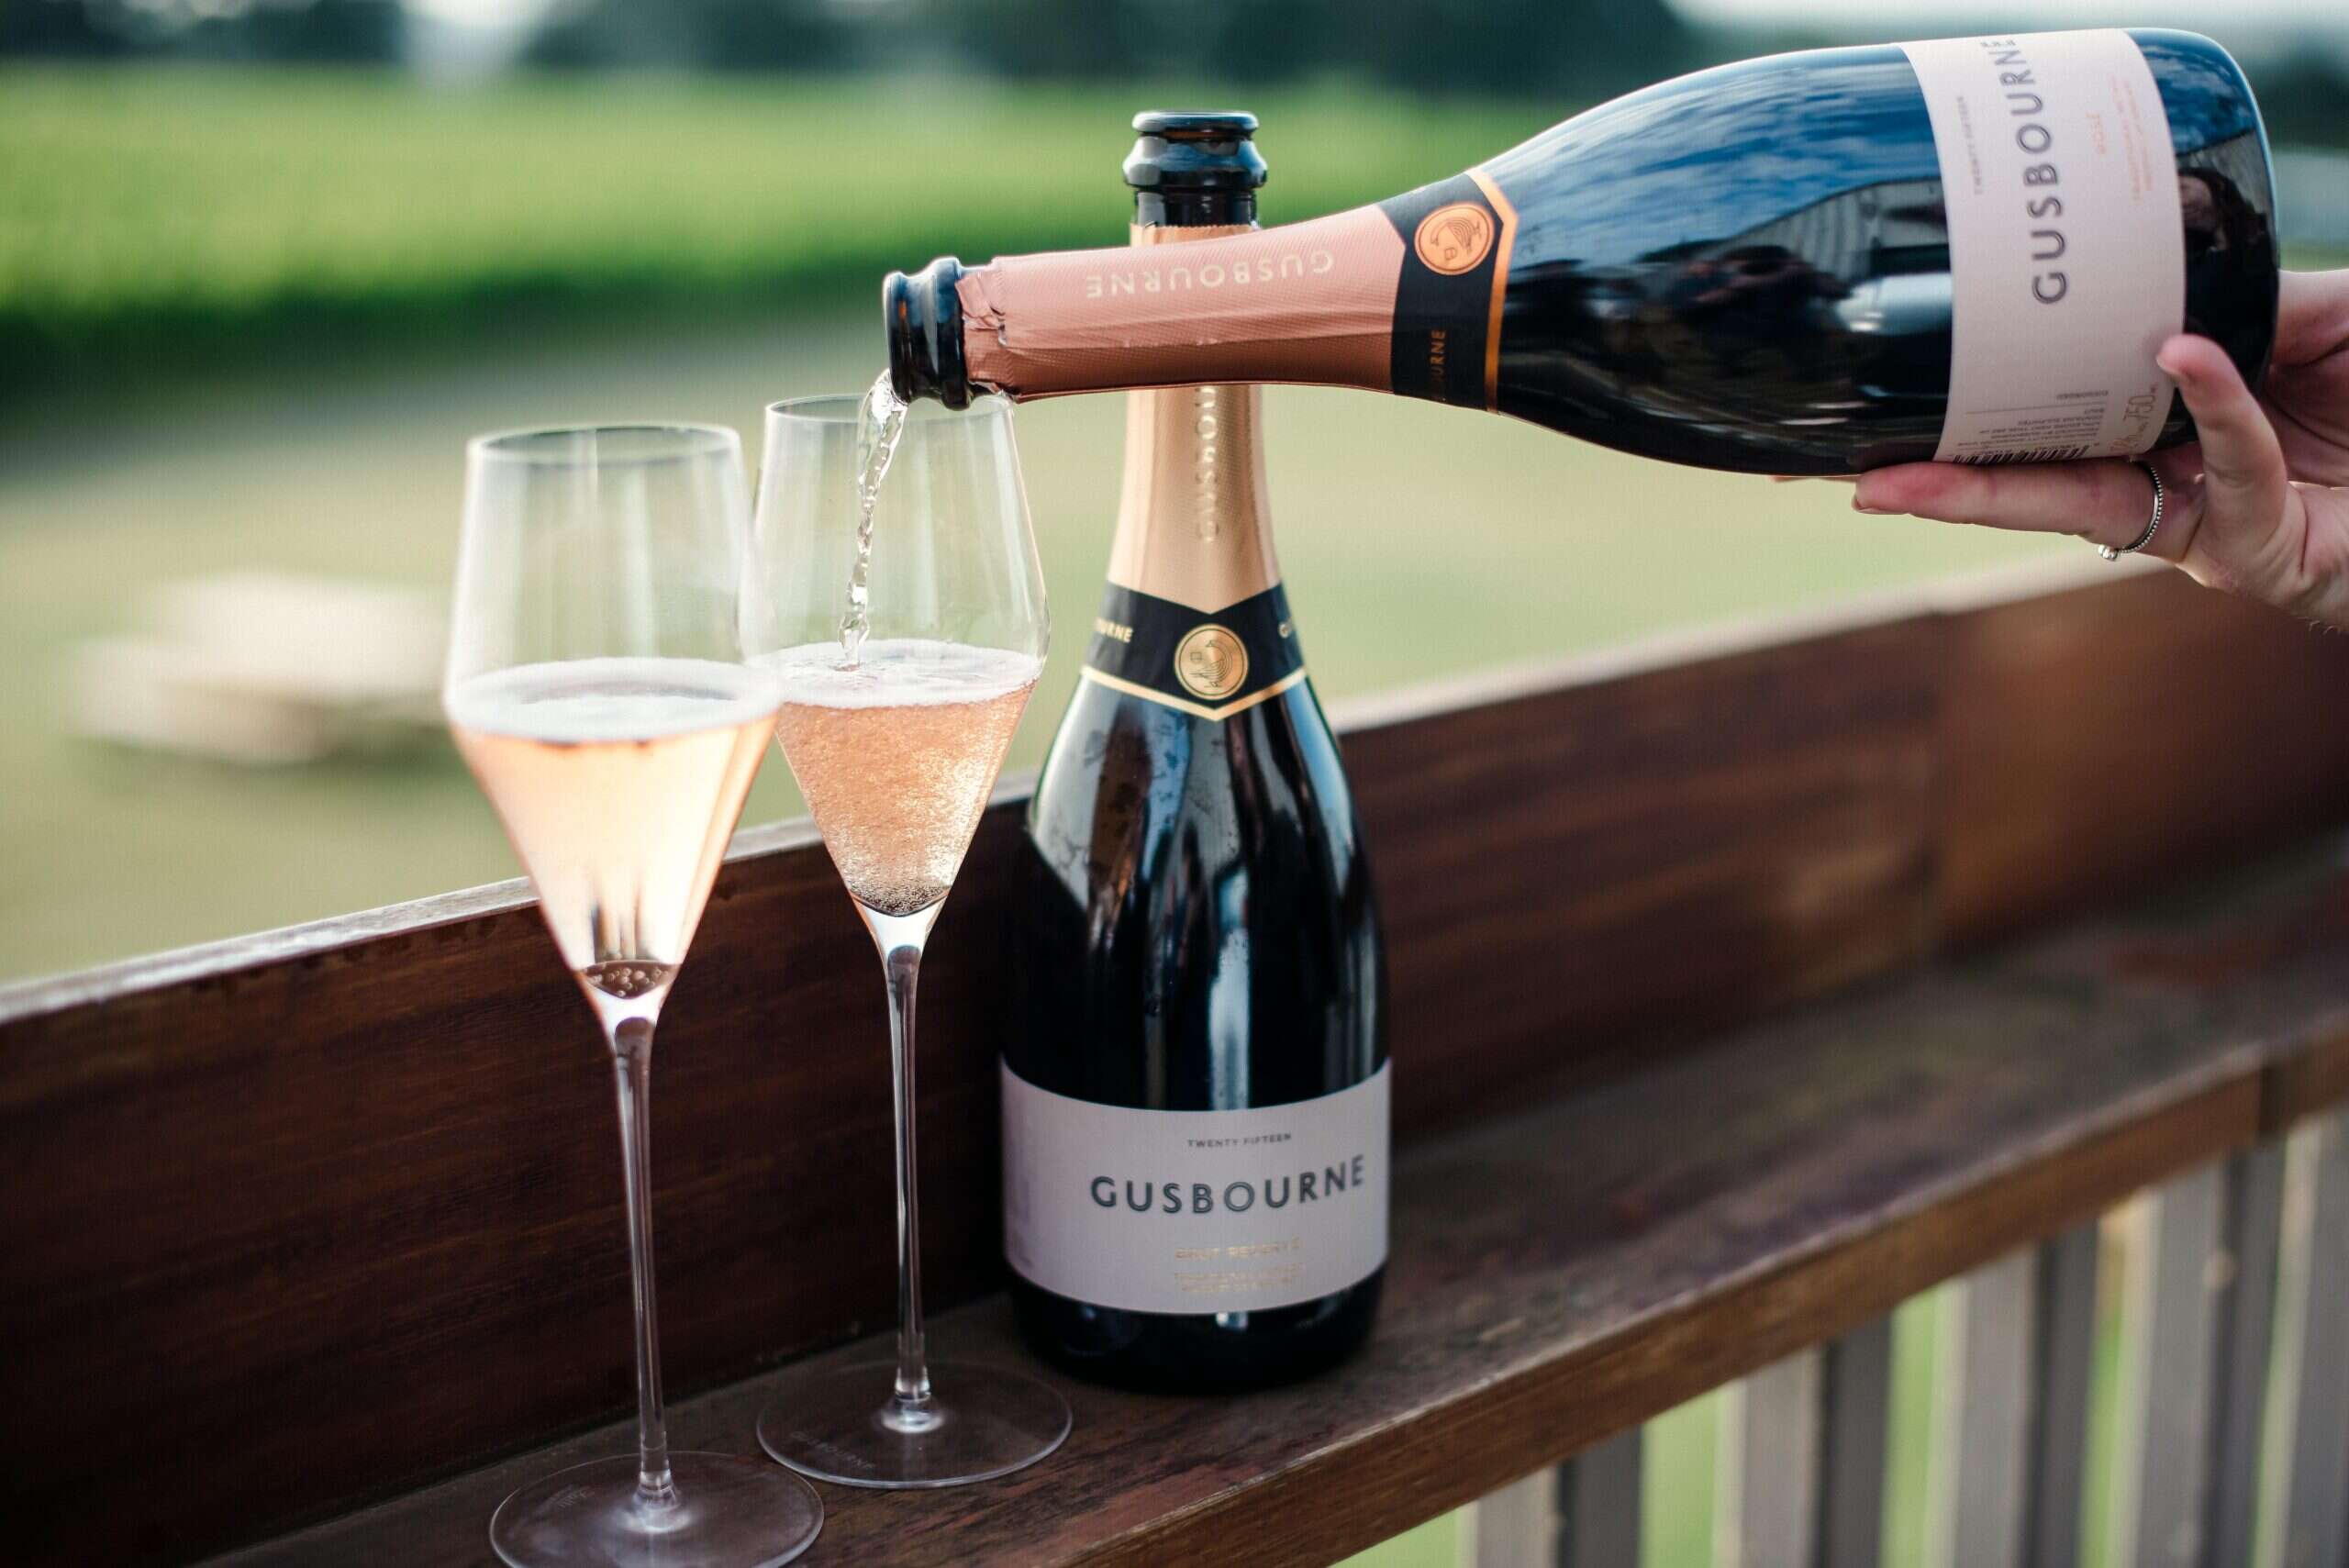 gusbourne english sparkling wine being poured